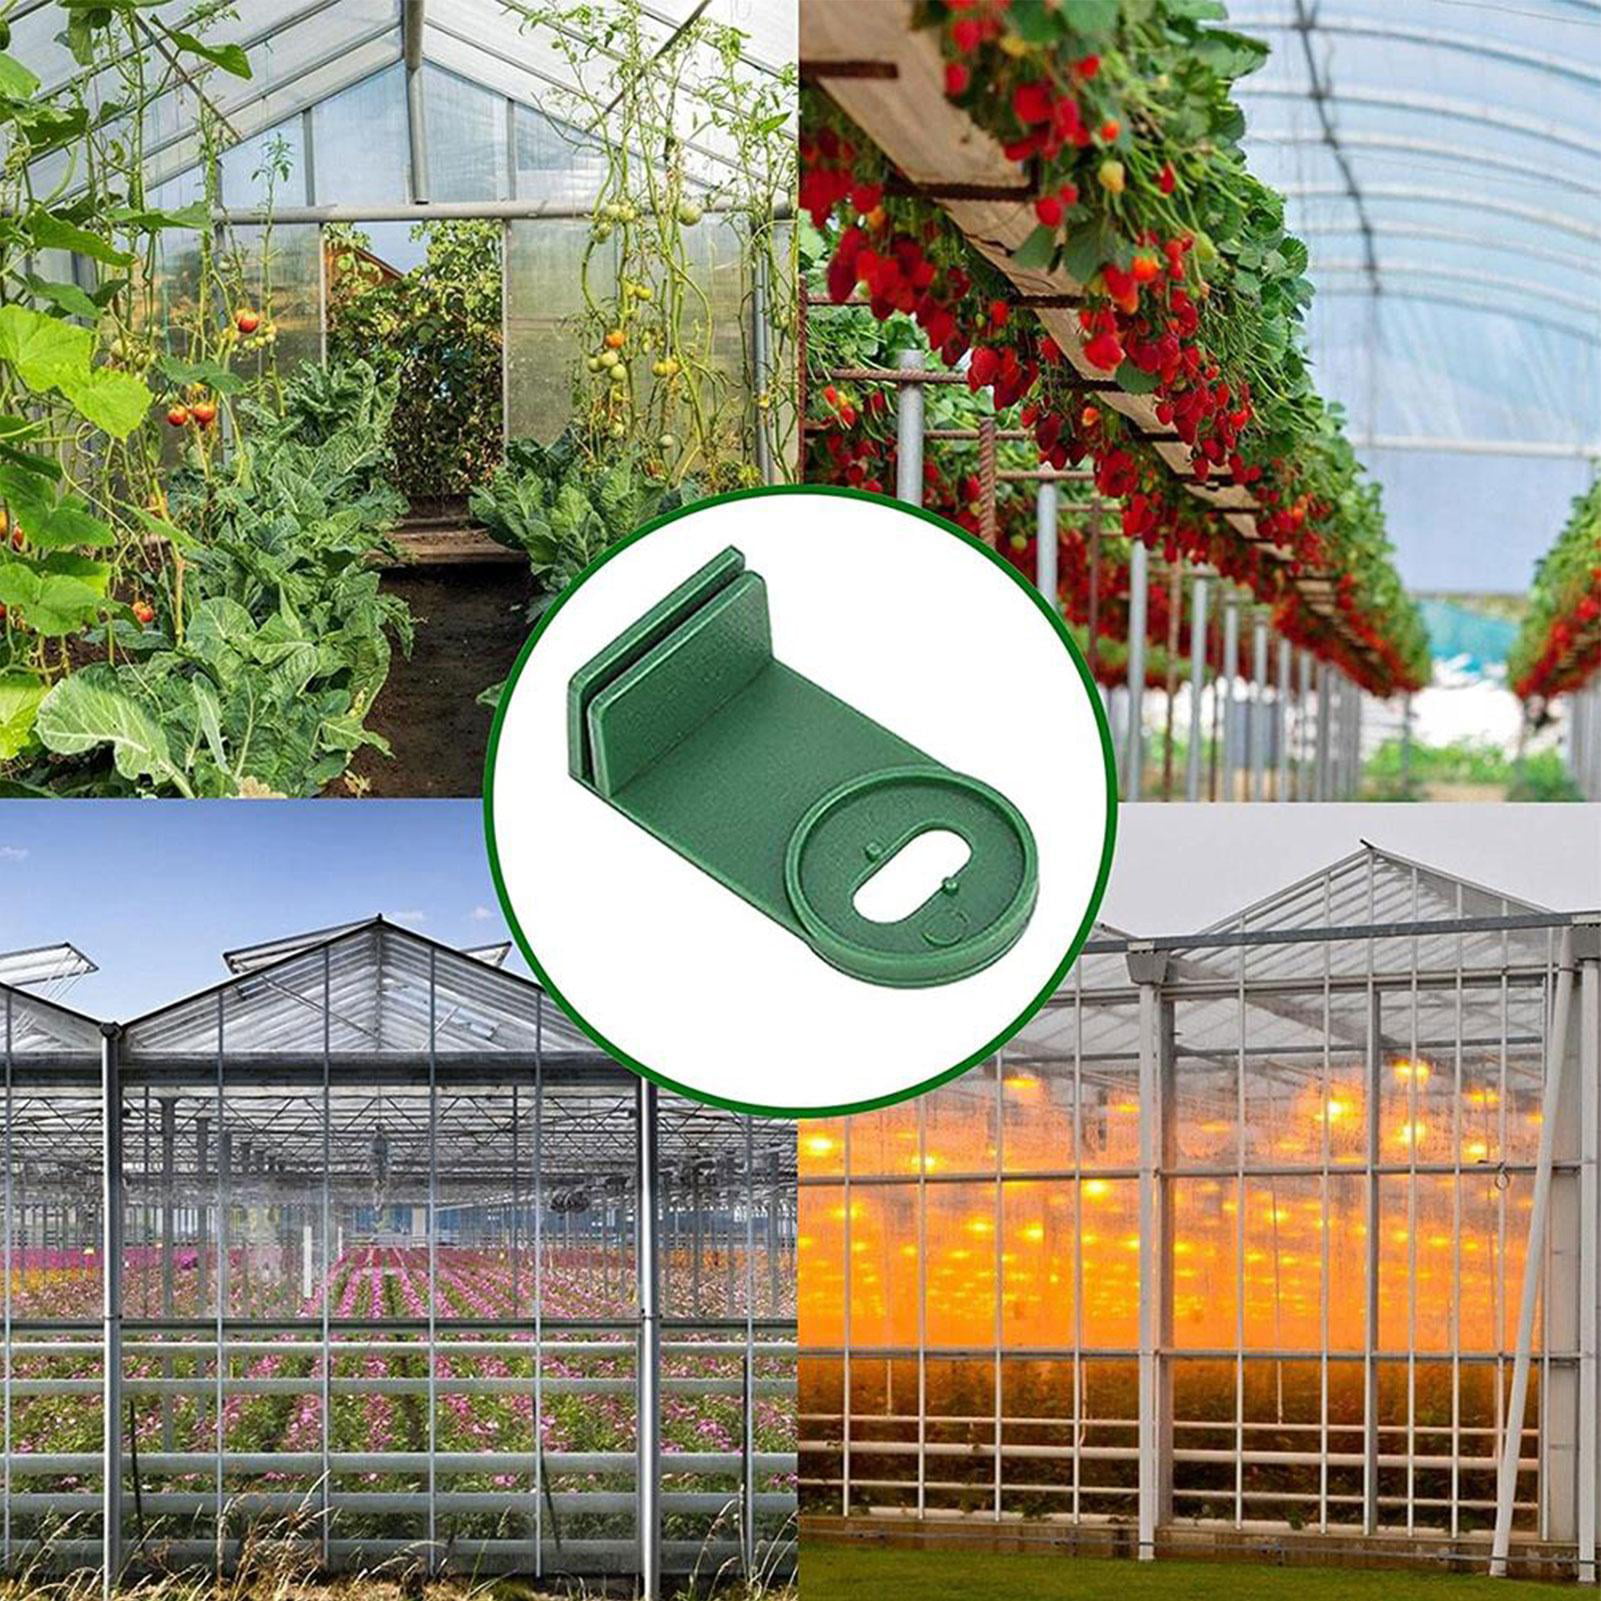 50pcs L Extenders Greenhouse Fixing Twist Clips Plastic Shading Clips/Washers/Extenders Clips/Corner Clips for Aluminium Greenhouse Insulation Bubble Netting Wrap 